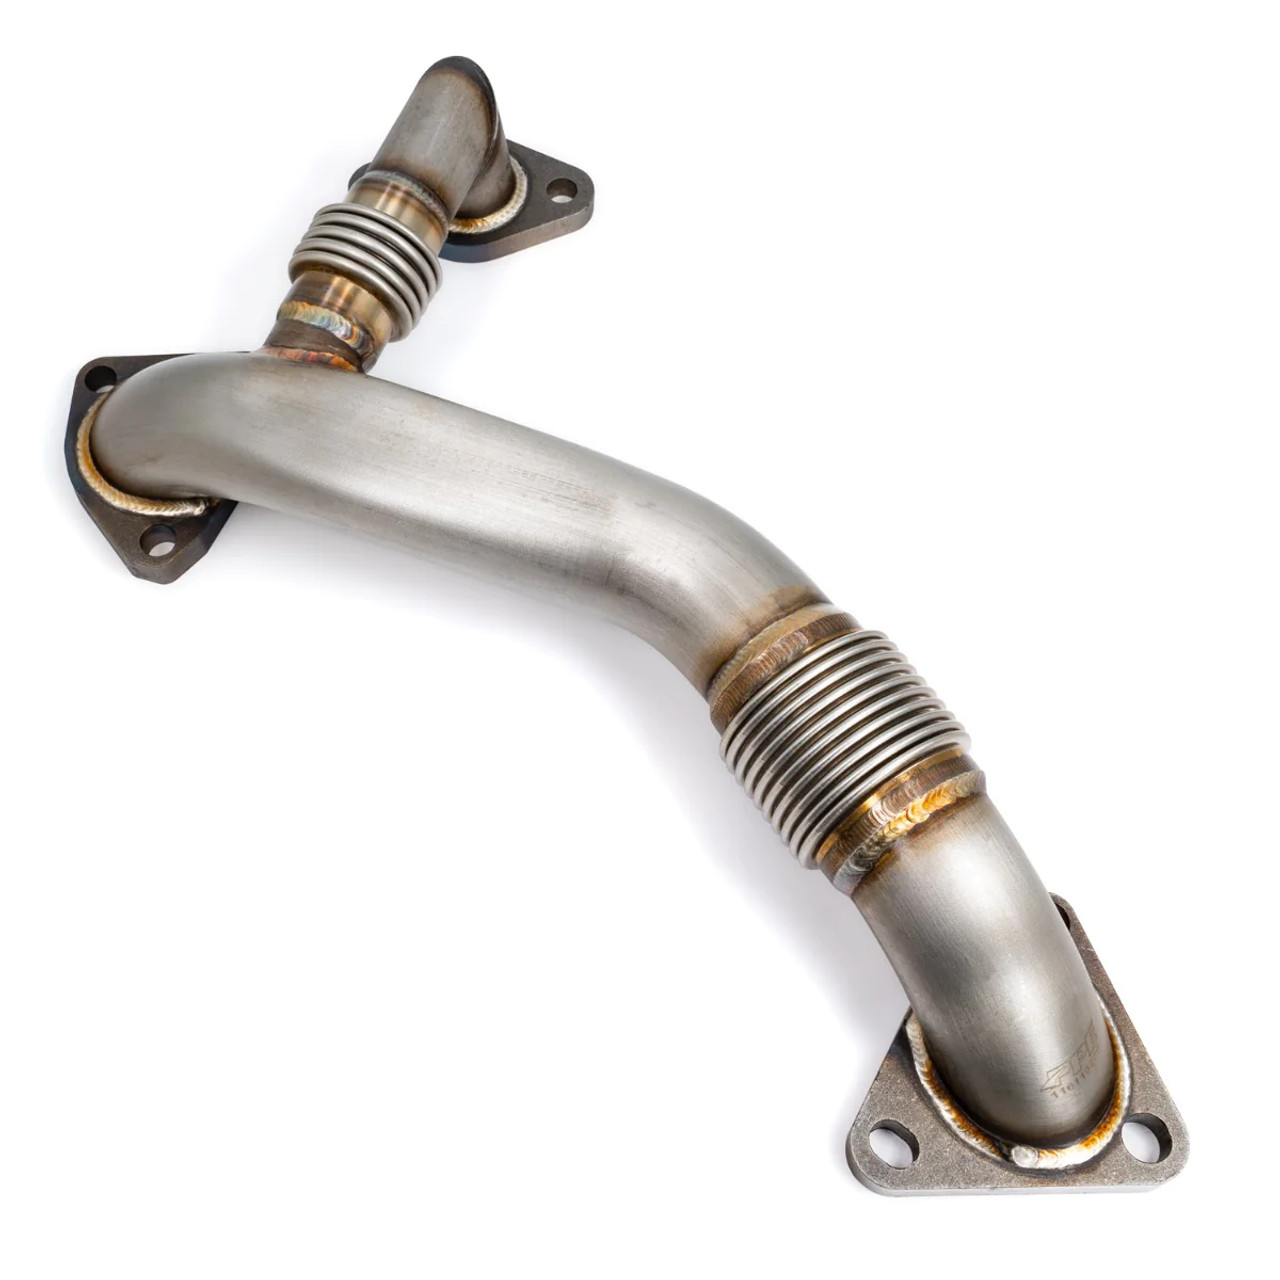  PPE Replacement Up-Pipe Passenger Side for PPE Exhaust Manifold for 6.6L Duramax- Main 3 View